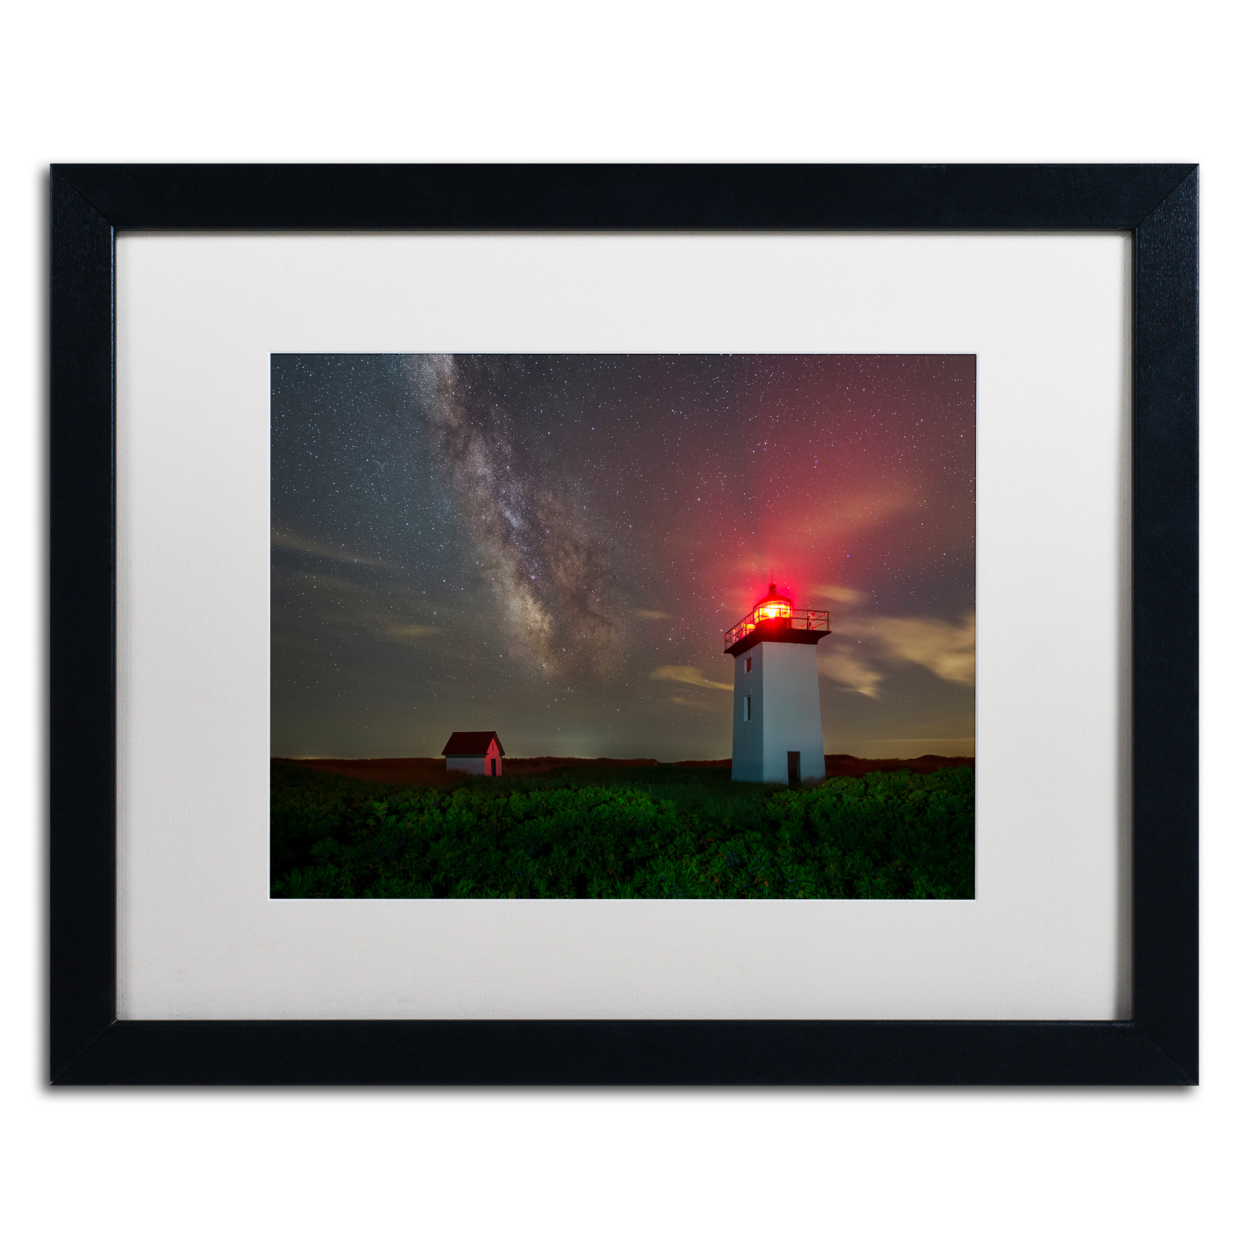 Michael Blanchette Photography 'Wood End Nights' Black Wooden Framed Art 18 X 22 Inches